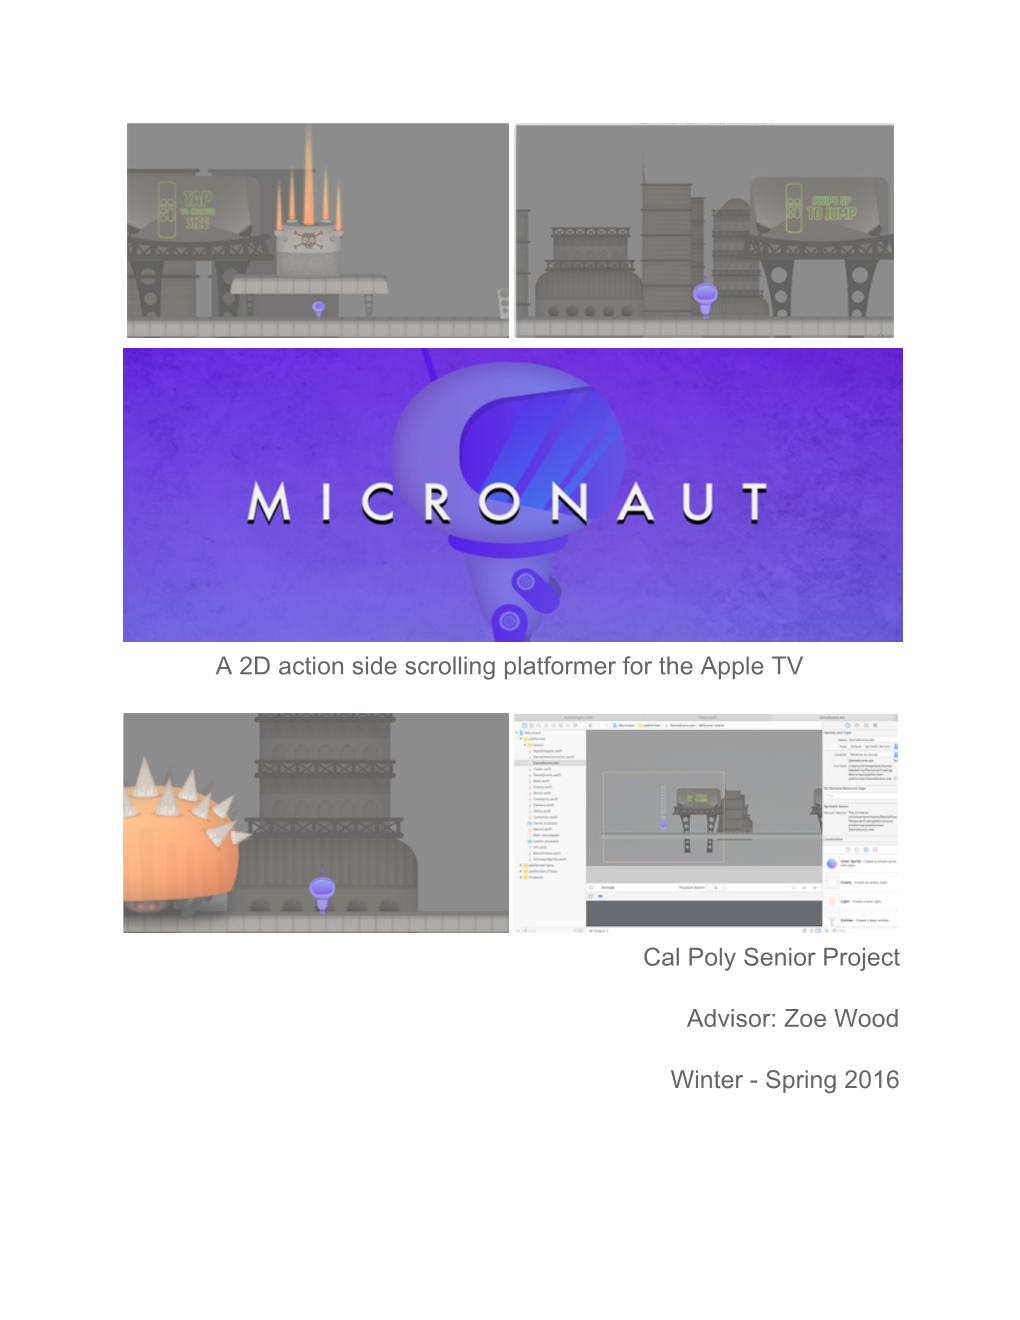 Micronaut: a 2D Action Side Scrolling Platformer for the Apple TV